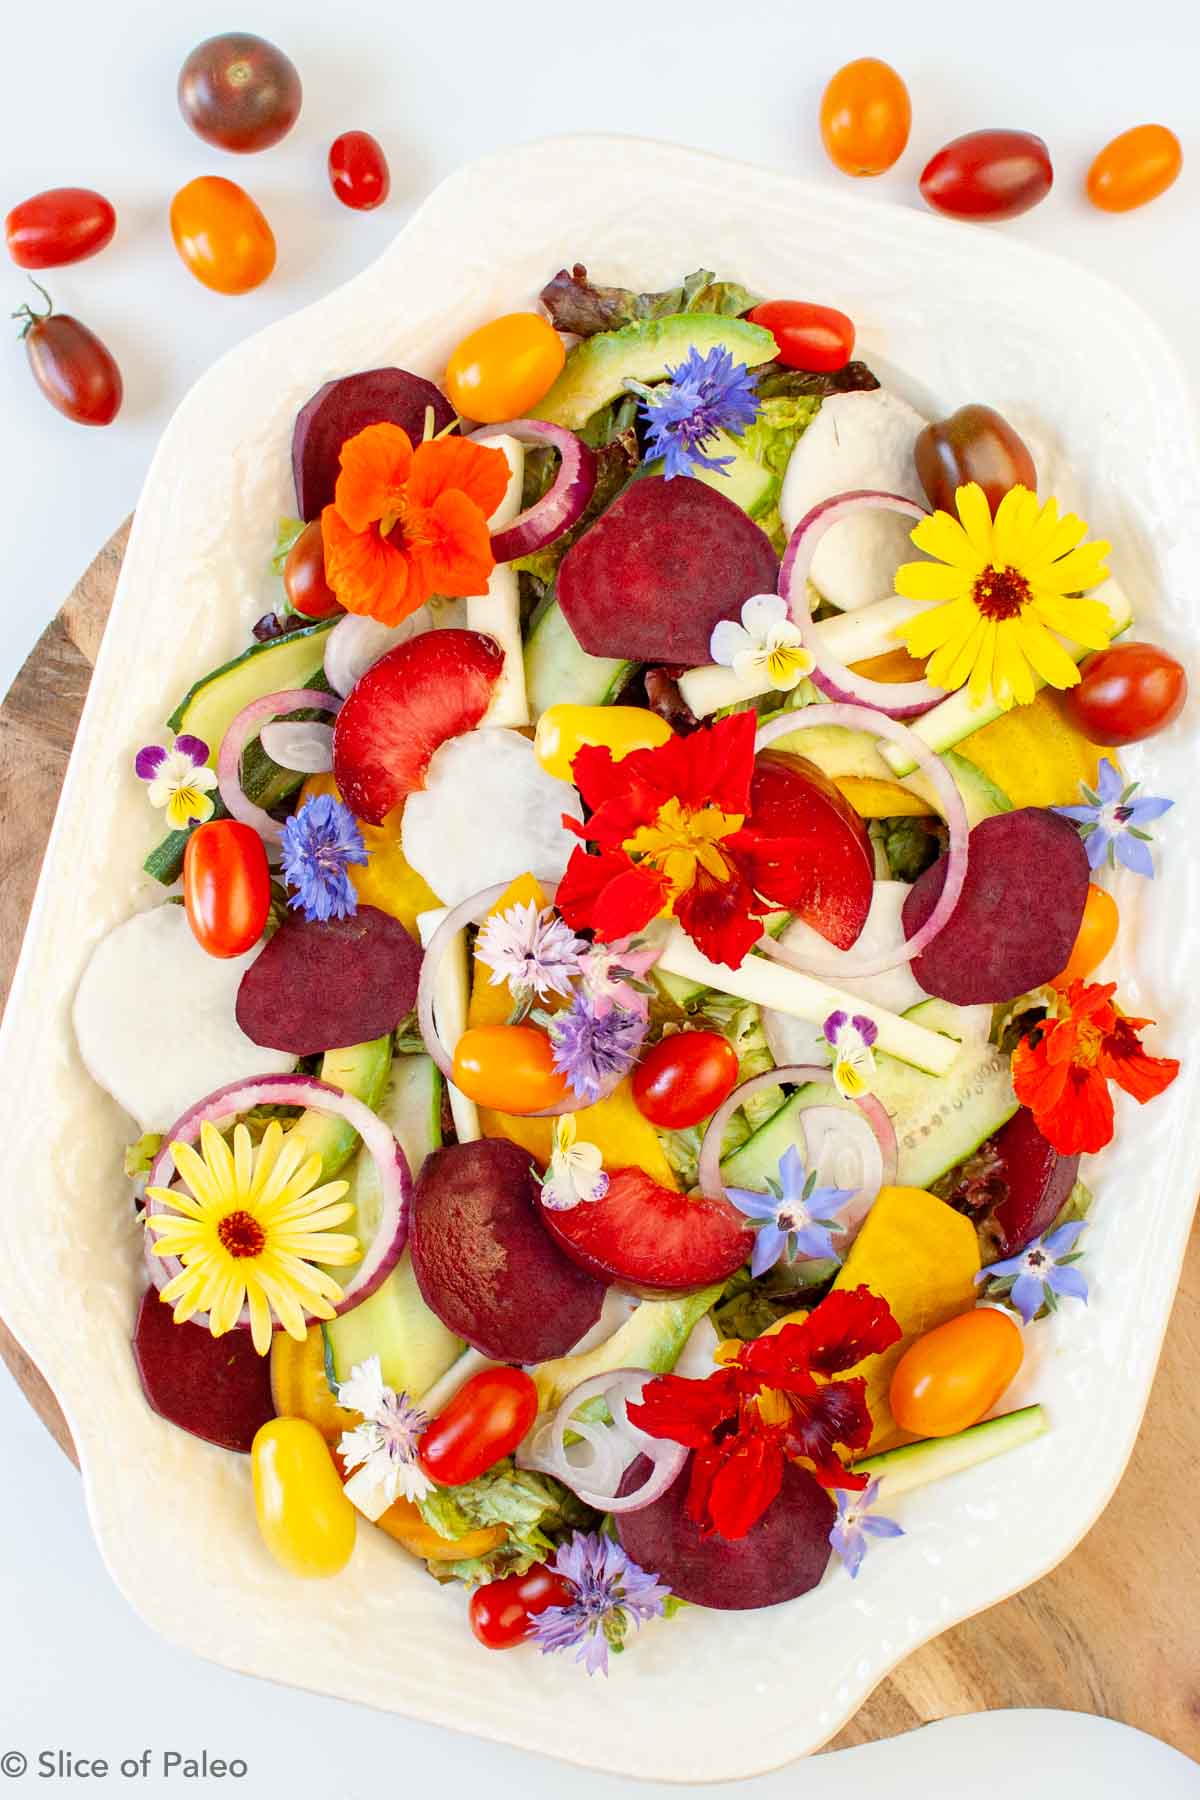 Creative Colorful & Edible Flower Salad Ideas with warm and cool colors